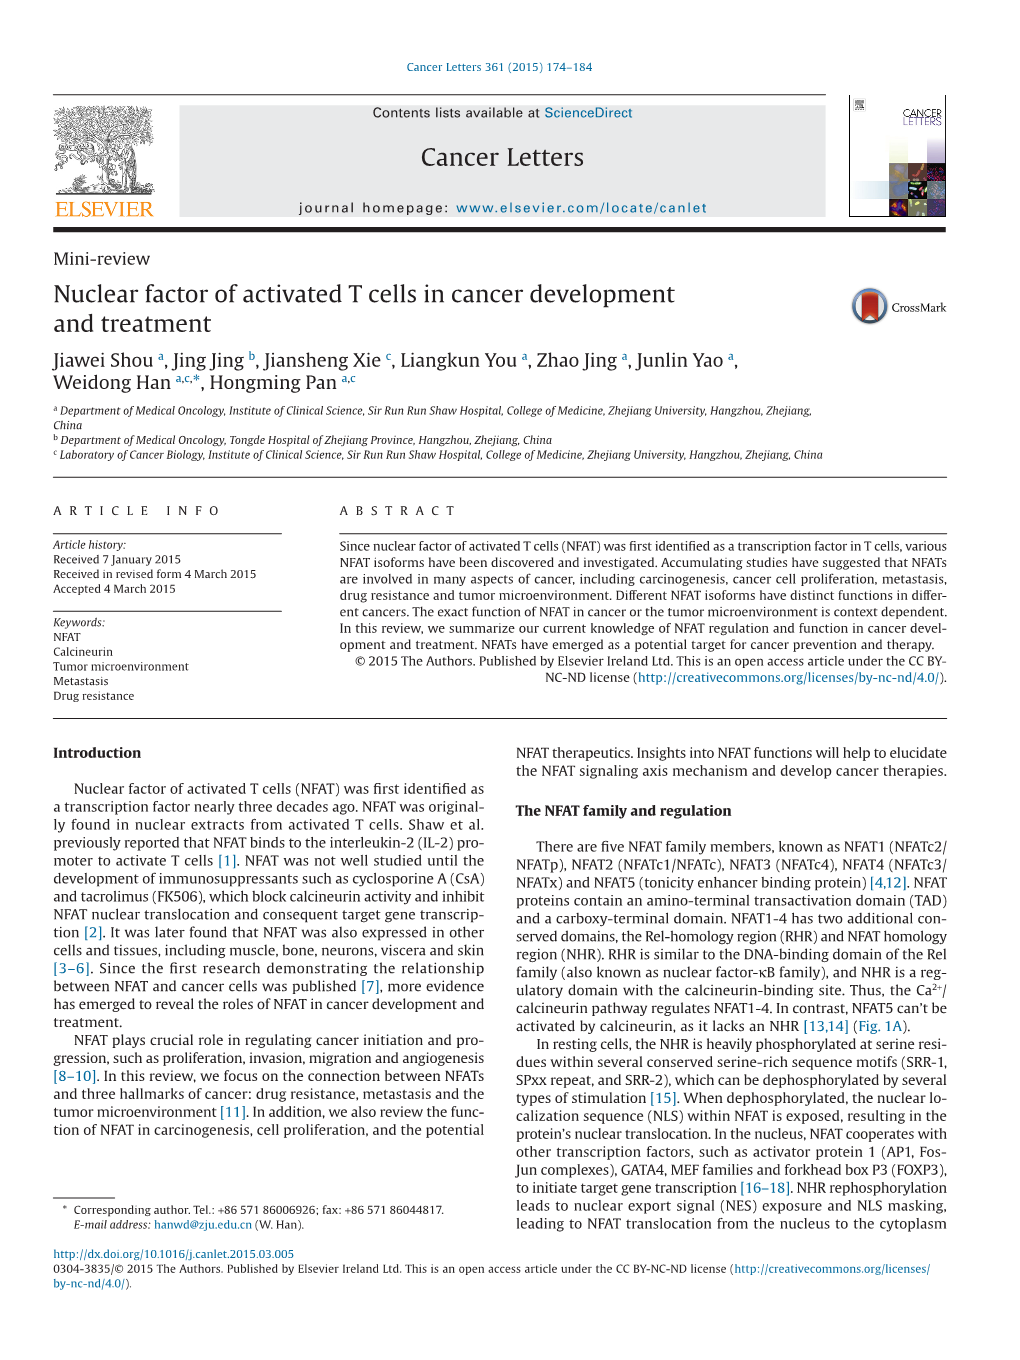 Nuclear Factor of Activated T Cells in Cancer Development and Treatment